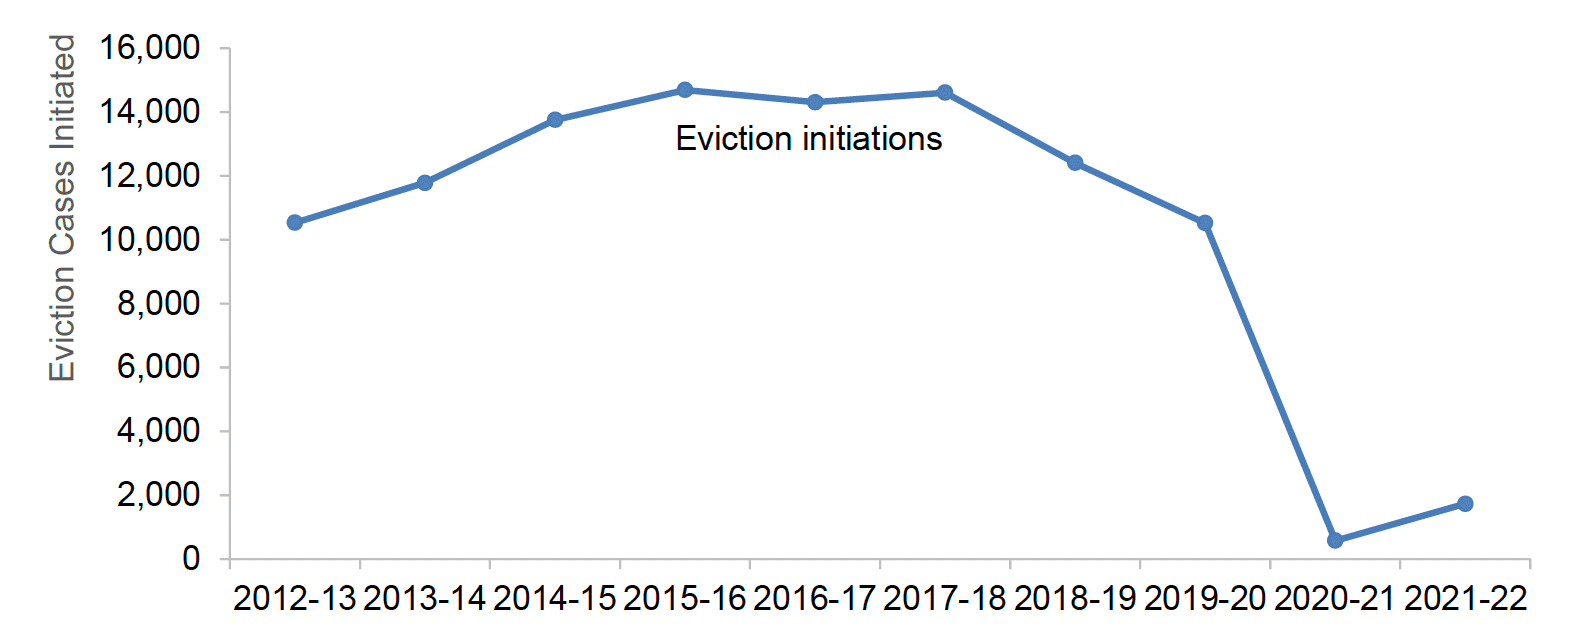 A line graph showing a time series of eviction cases initiated between 2012-13 and 2021-22. Evictions have been decreasing in recent years but fell rapidly during the pandemic due to emergency legislation protecting tenants from eviction. Evictions rose from 2020-21 but still far below pre-pandemic levels.